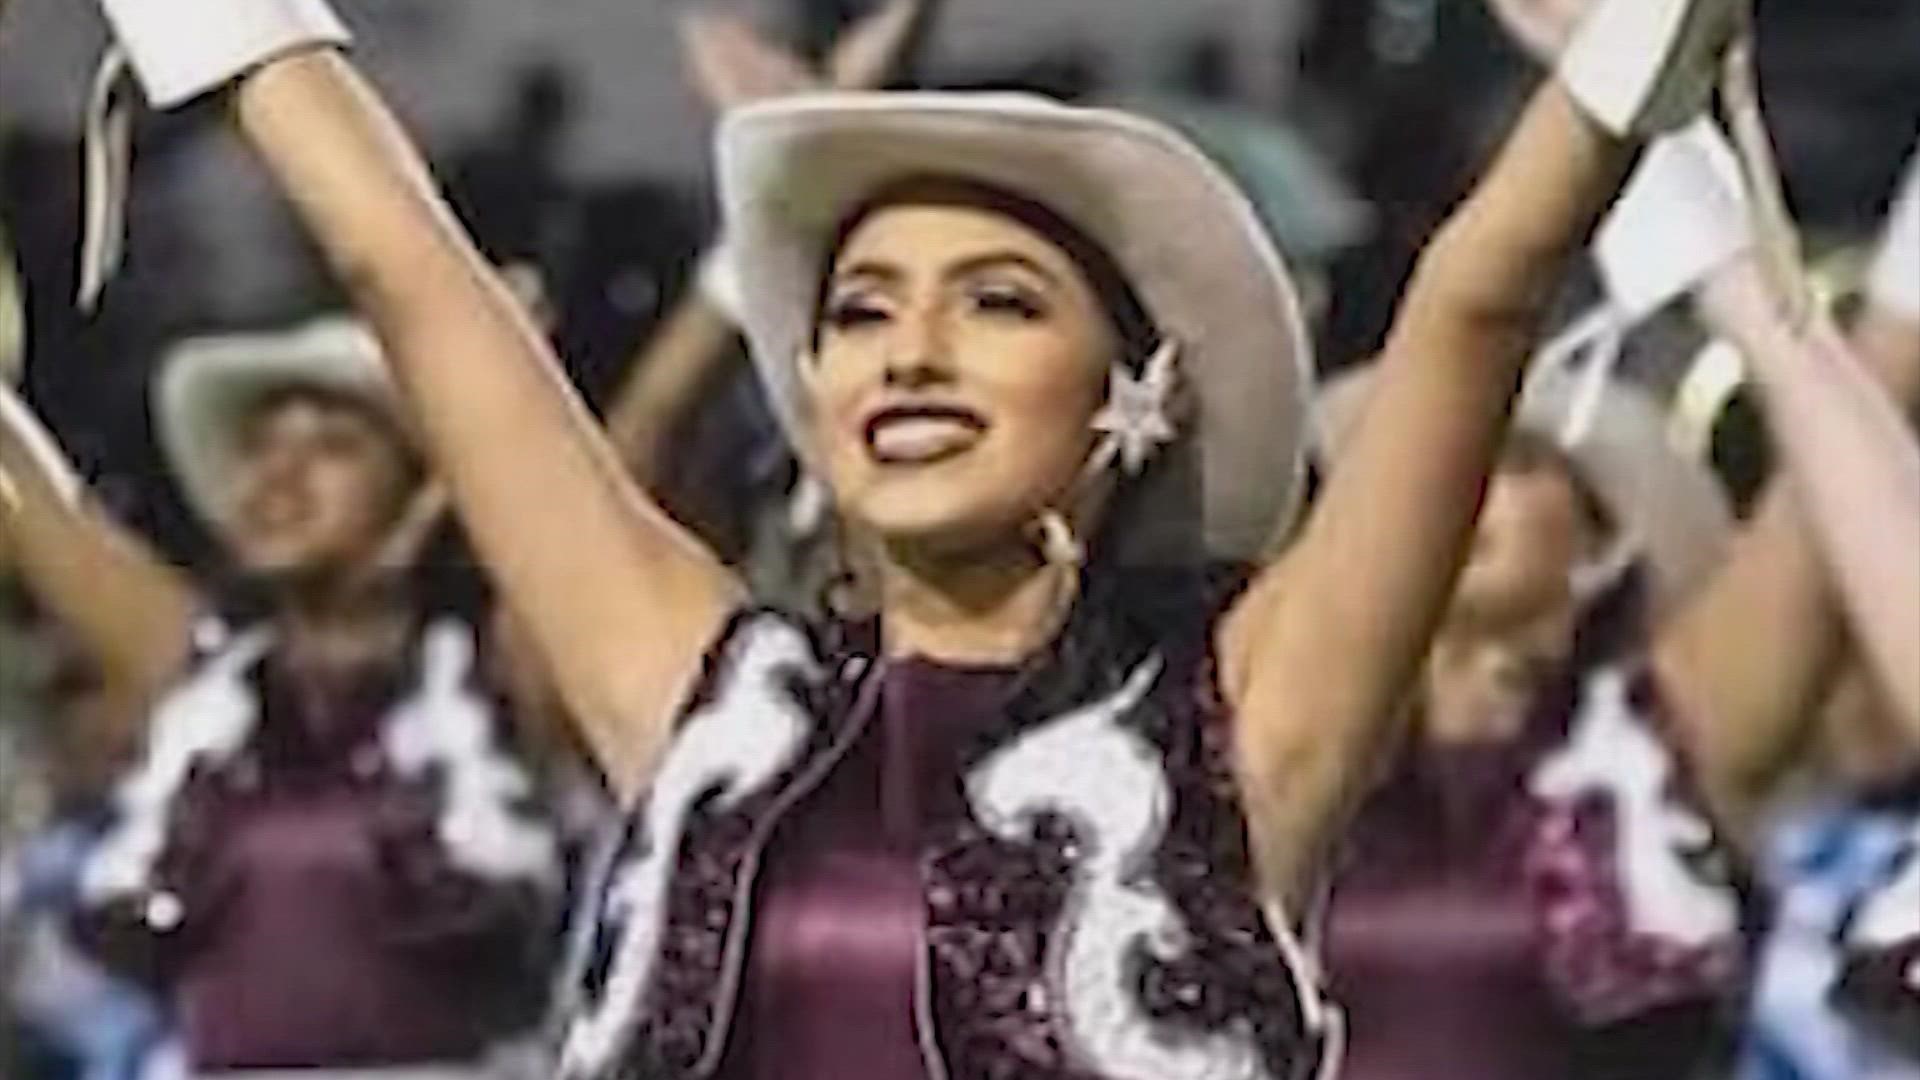 Brianna Rodriguez, the Heights High School student   who died during Astroworld Festival, will be laid to rest Saturday.